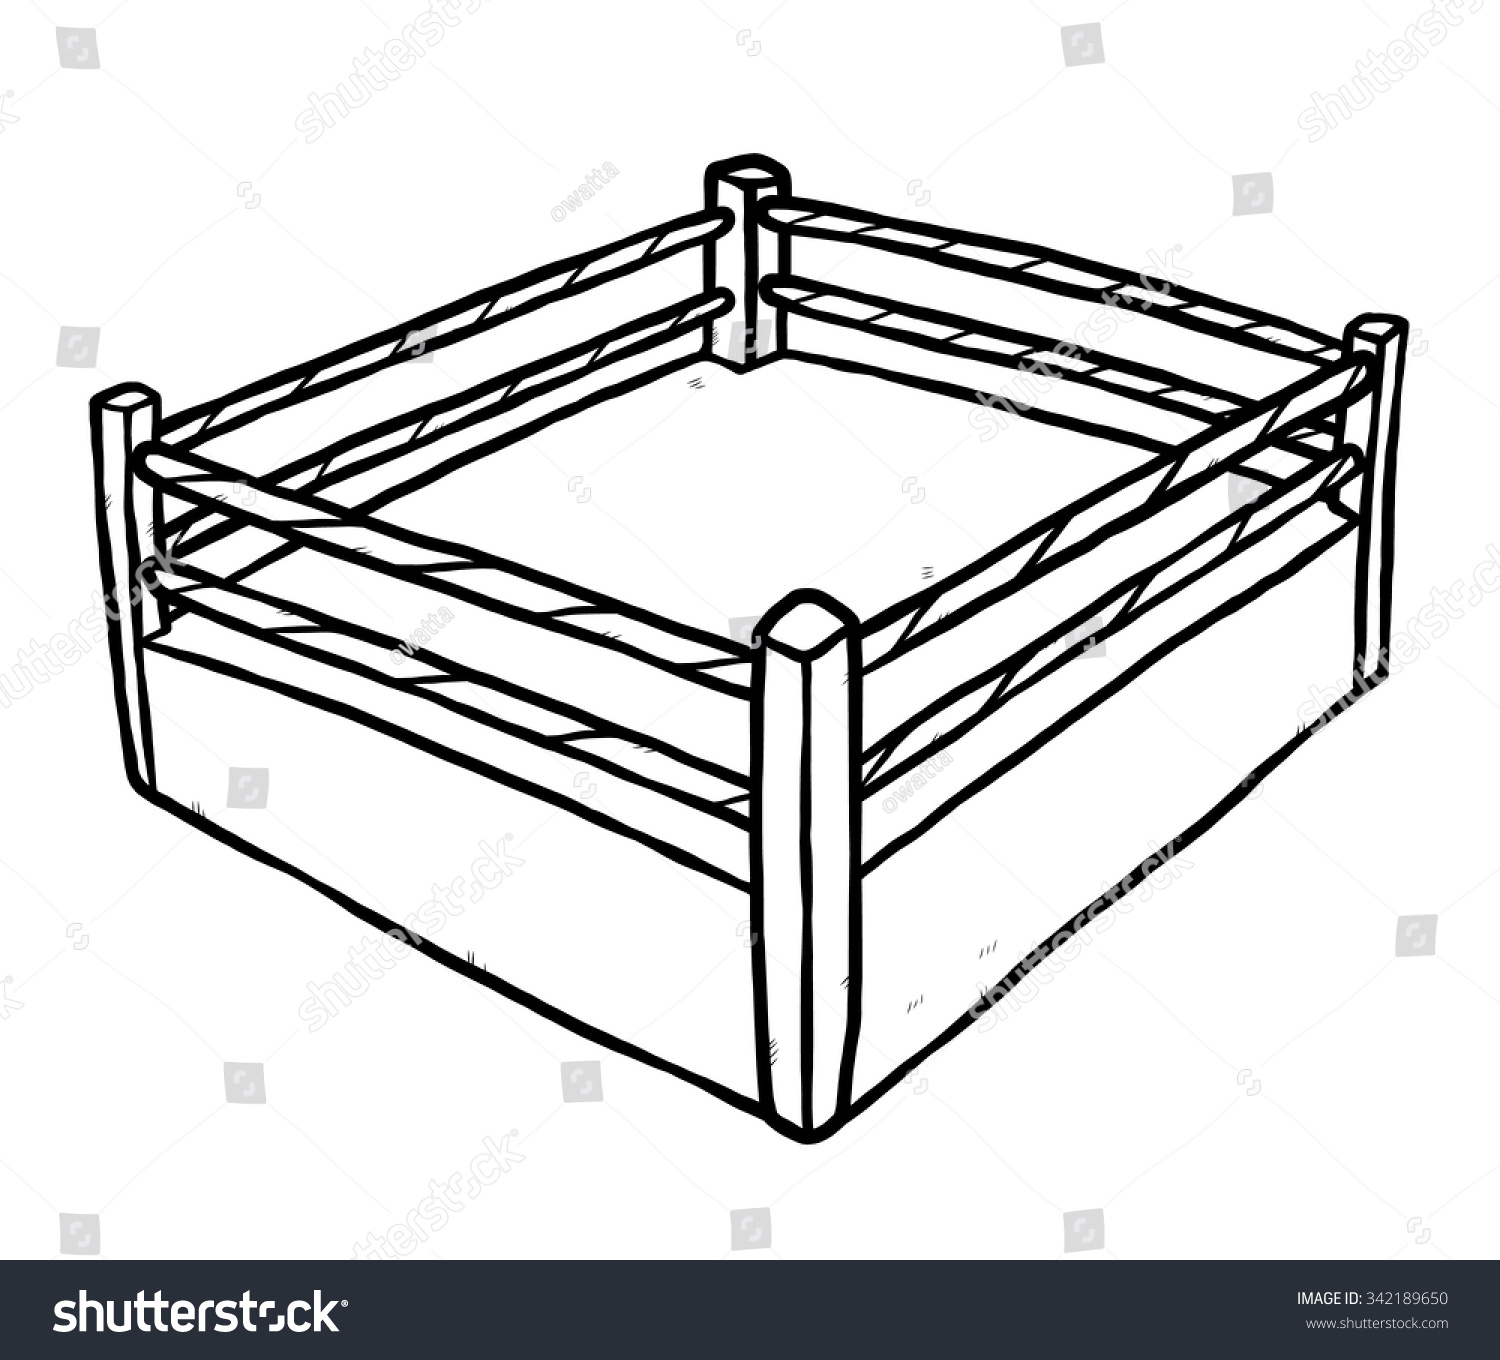 boxing ring clipart free - photo #30